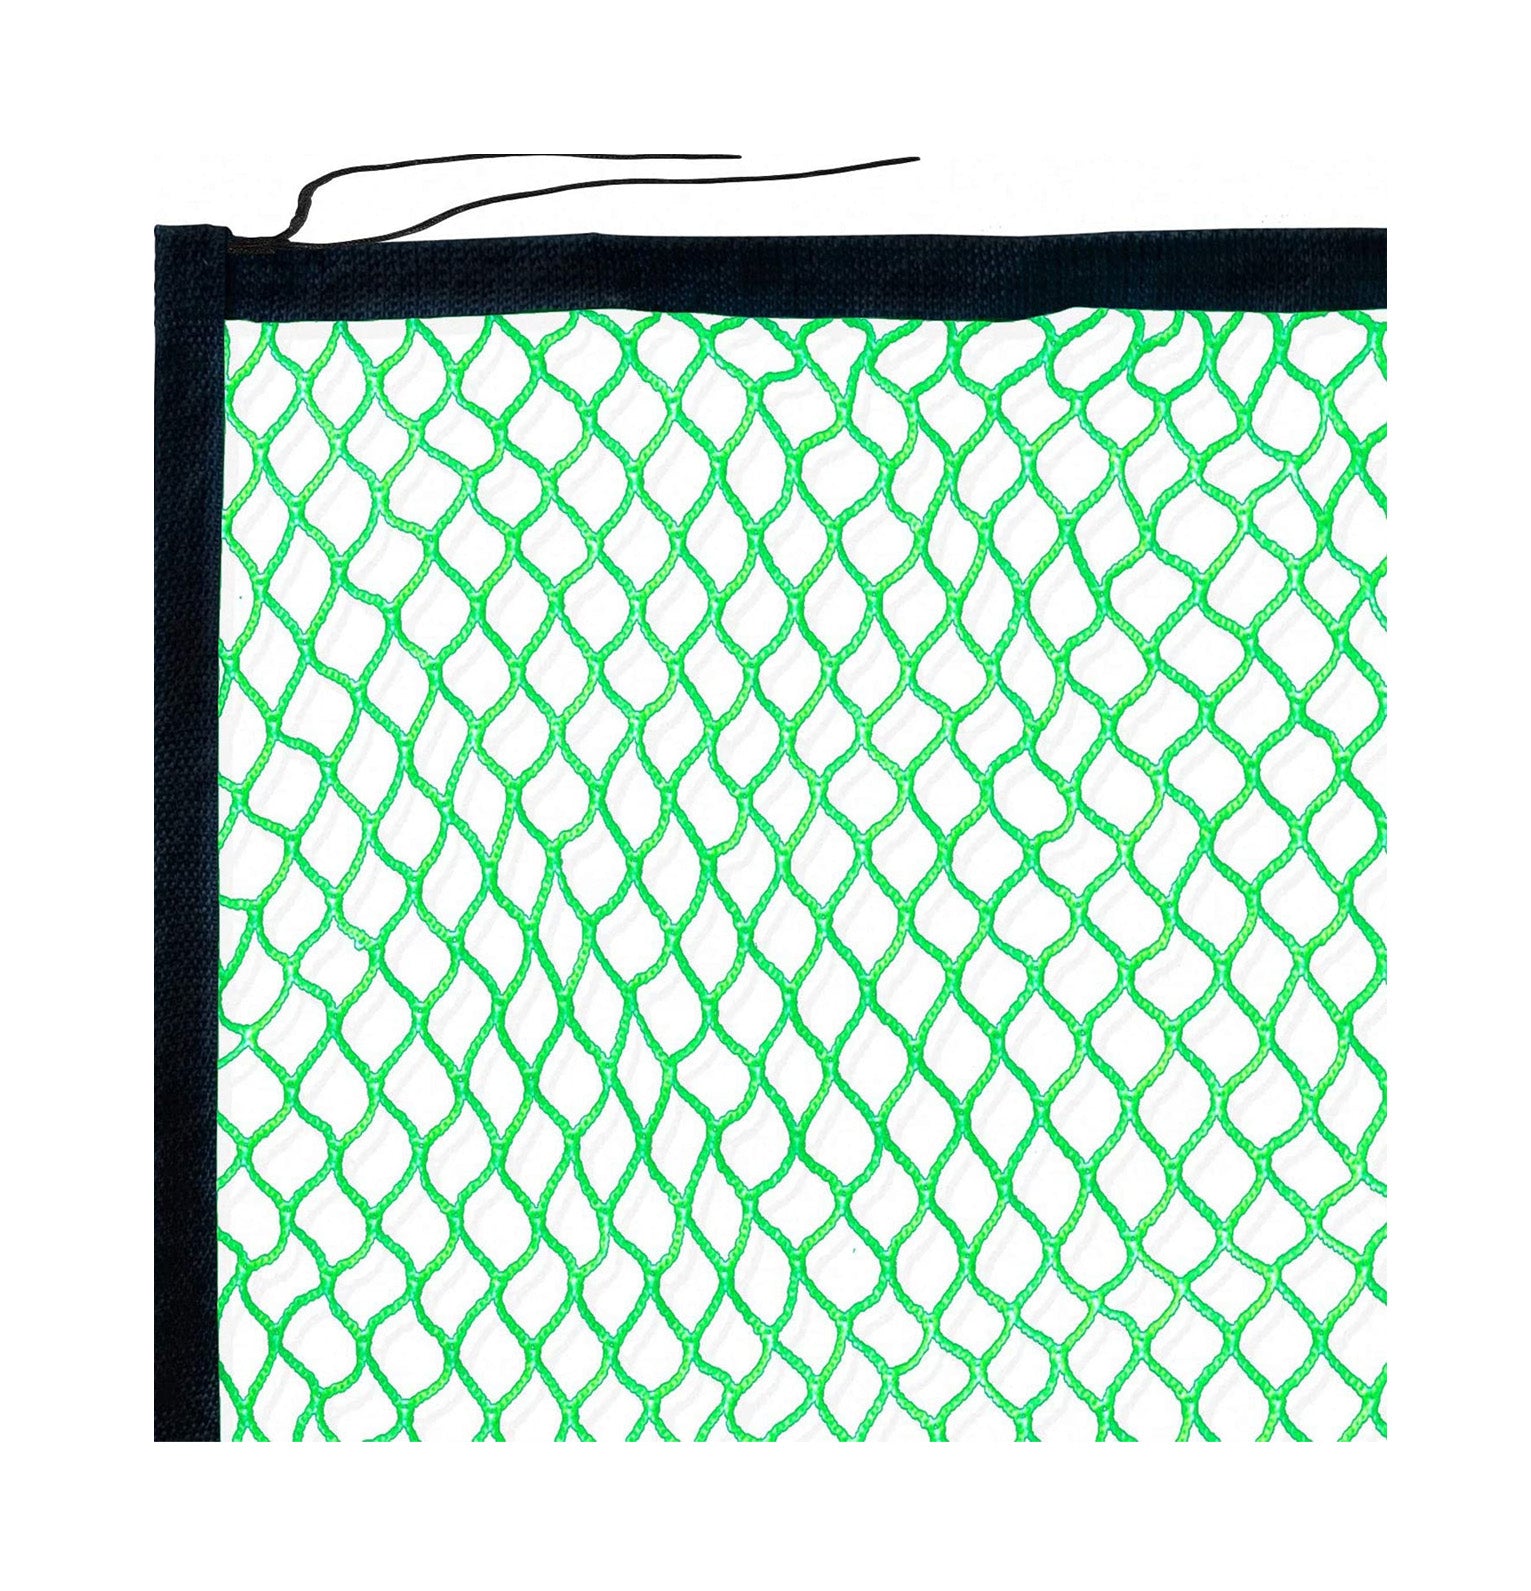 Back Protective Net Piece of Golf Cage Net,10x10FT Golf Hitting Cage Replacement Net Only,Golf Back Net Piece for Backyard Driving,Back Protective Net Piece 10x10FT